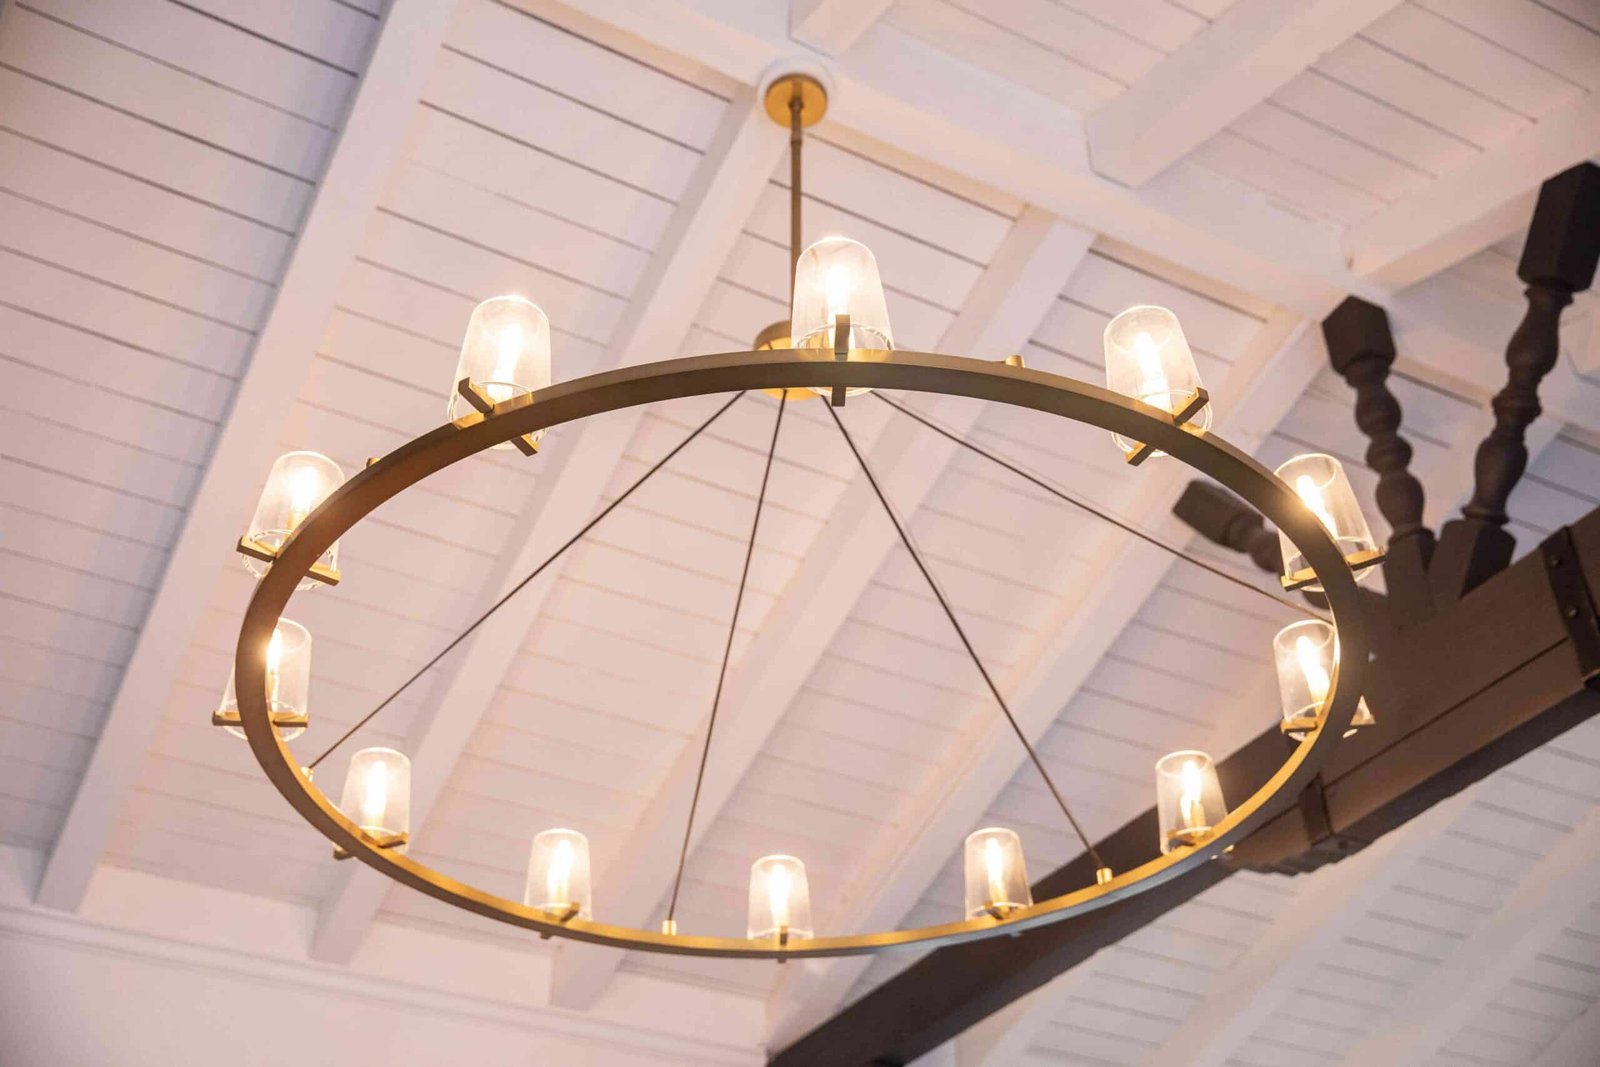 Top 5 Chandelier Techniques to Optimize Your Home Lighting